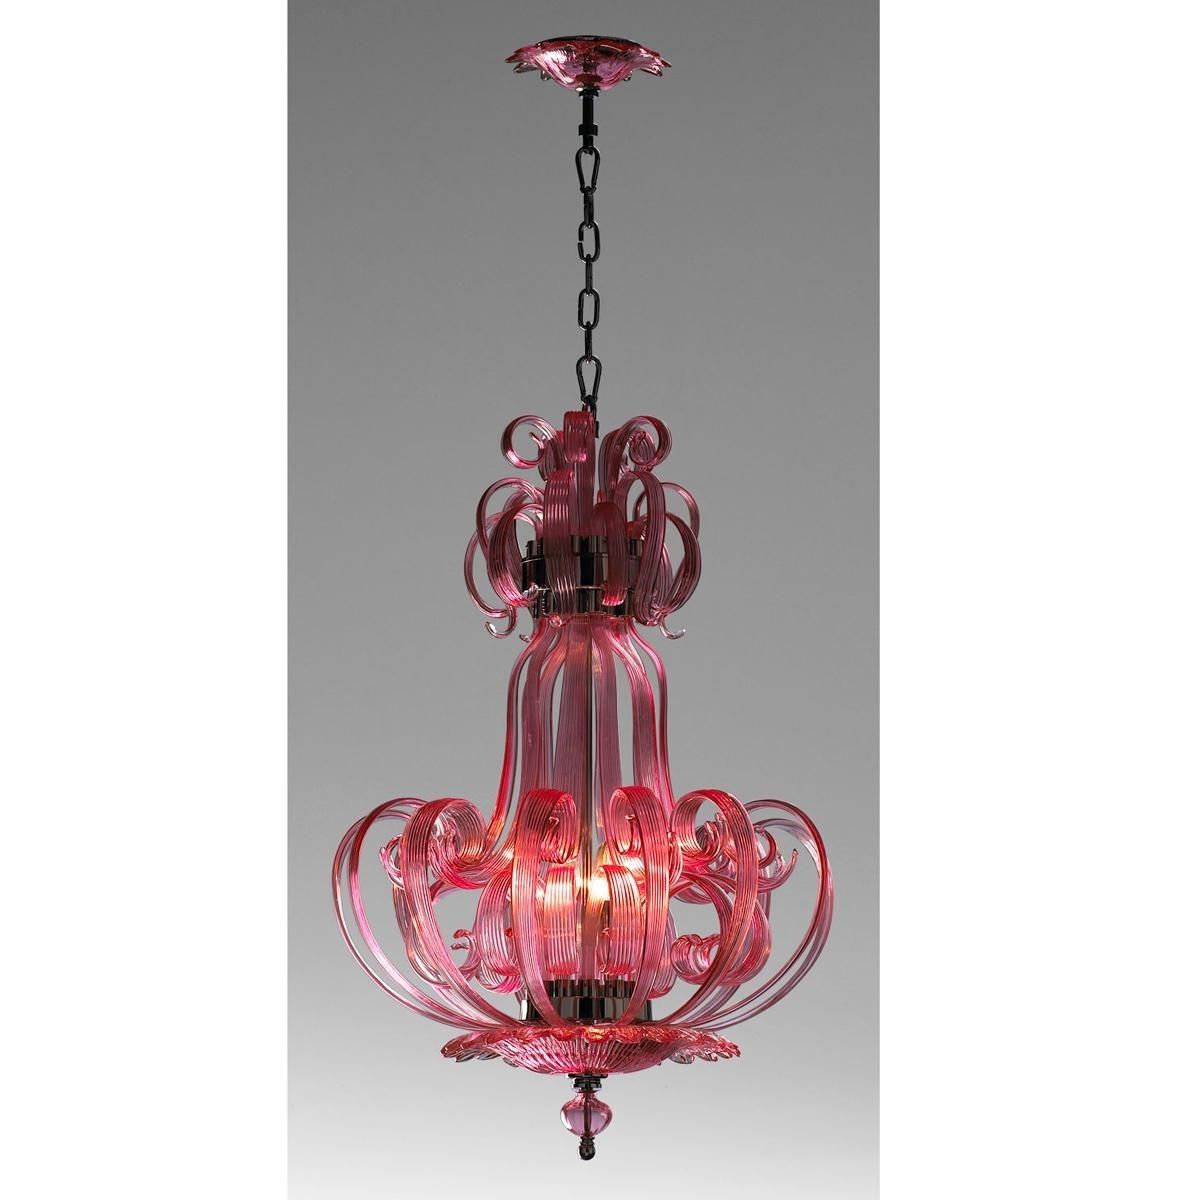 Murano Style Veneto Chandelier In Pink, Turquoise Or Clear Pertaining To Popular Turquoise And Pink Chandeliers (View 13 of 15)